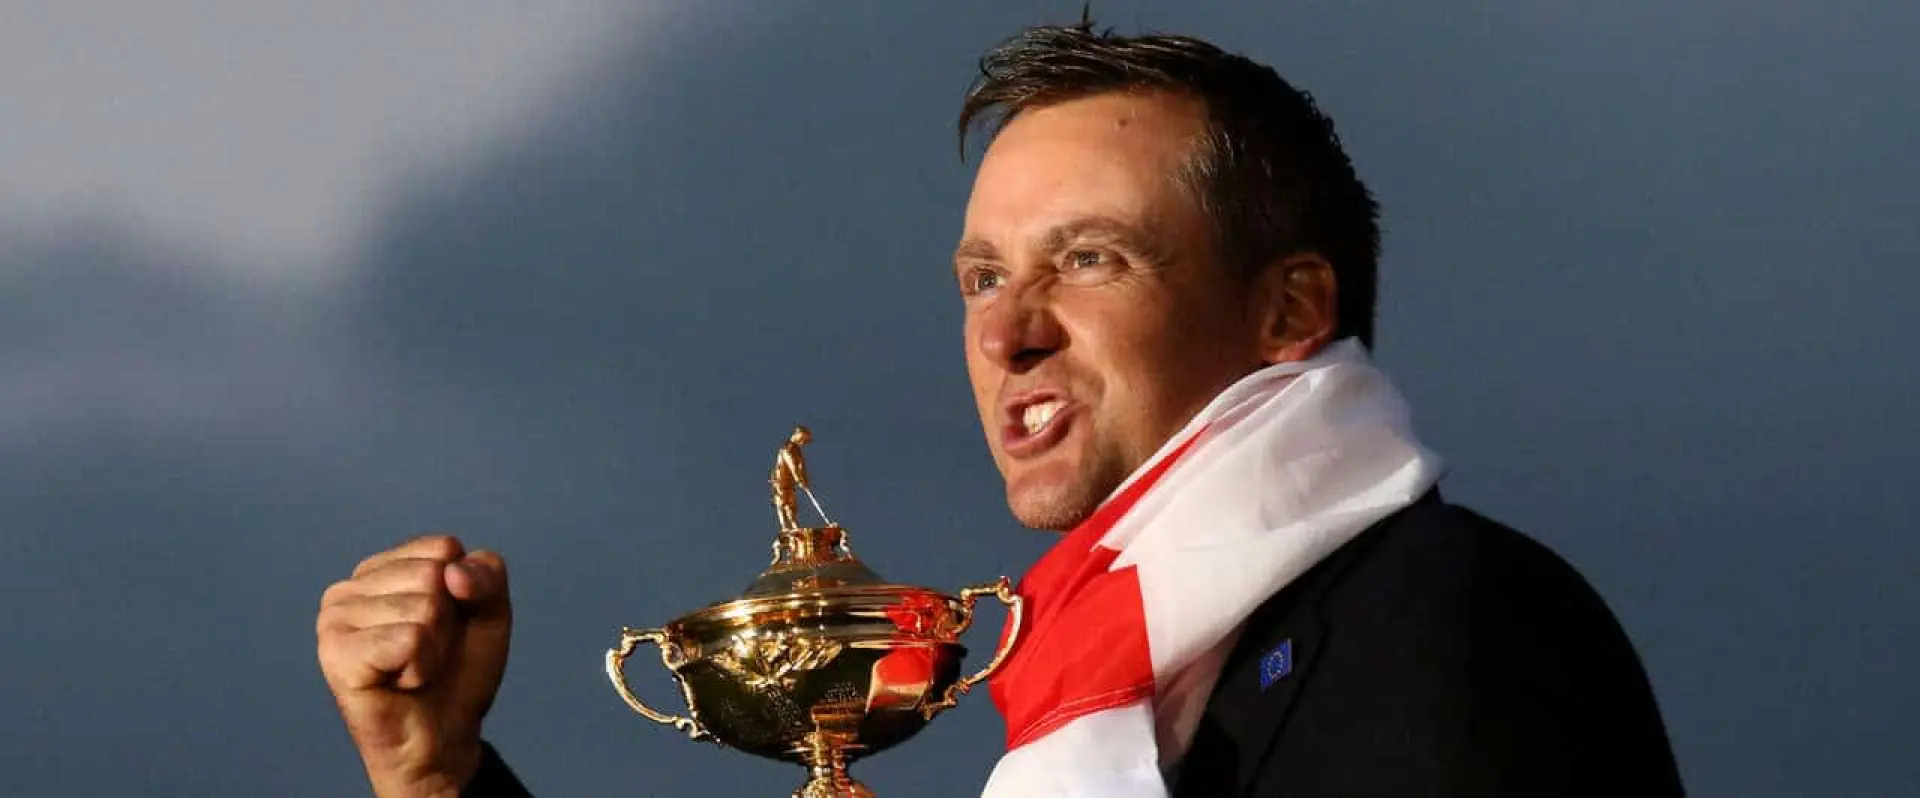 Poulter is one of the greatest Ryder Cup players in history.